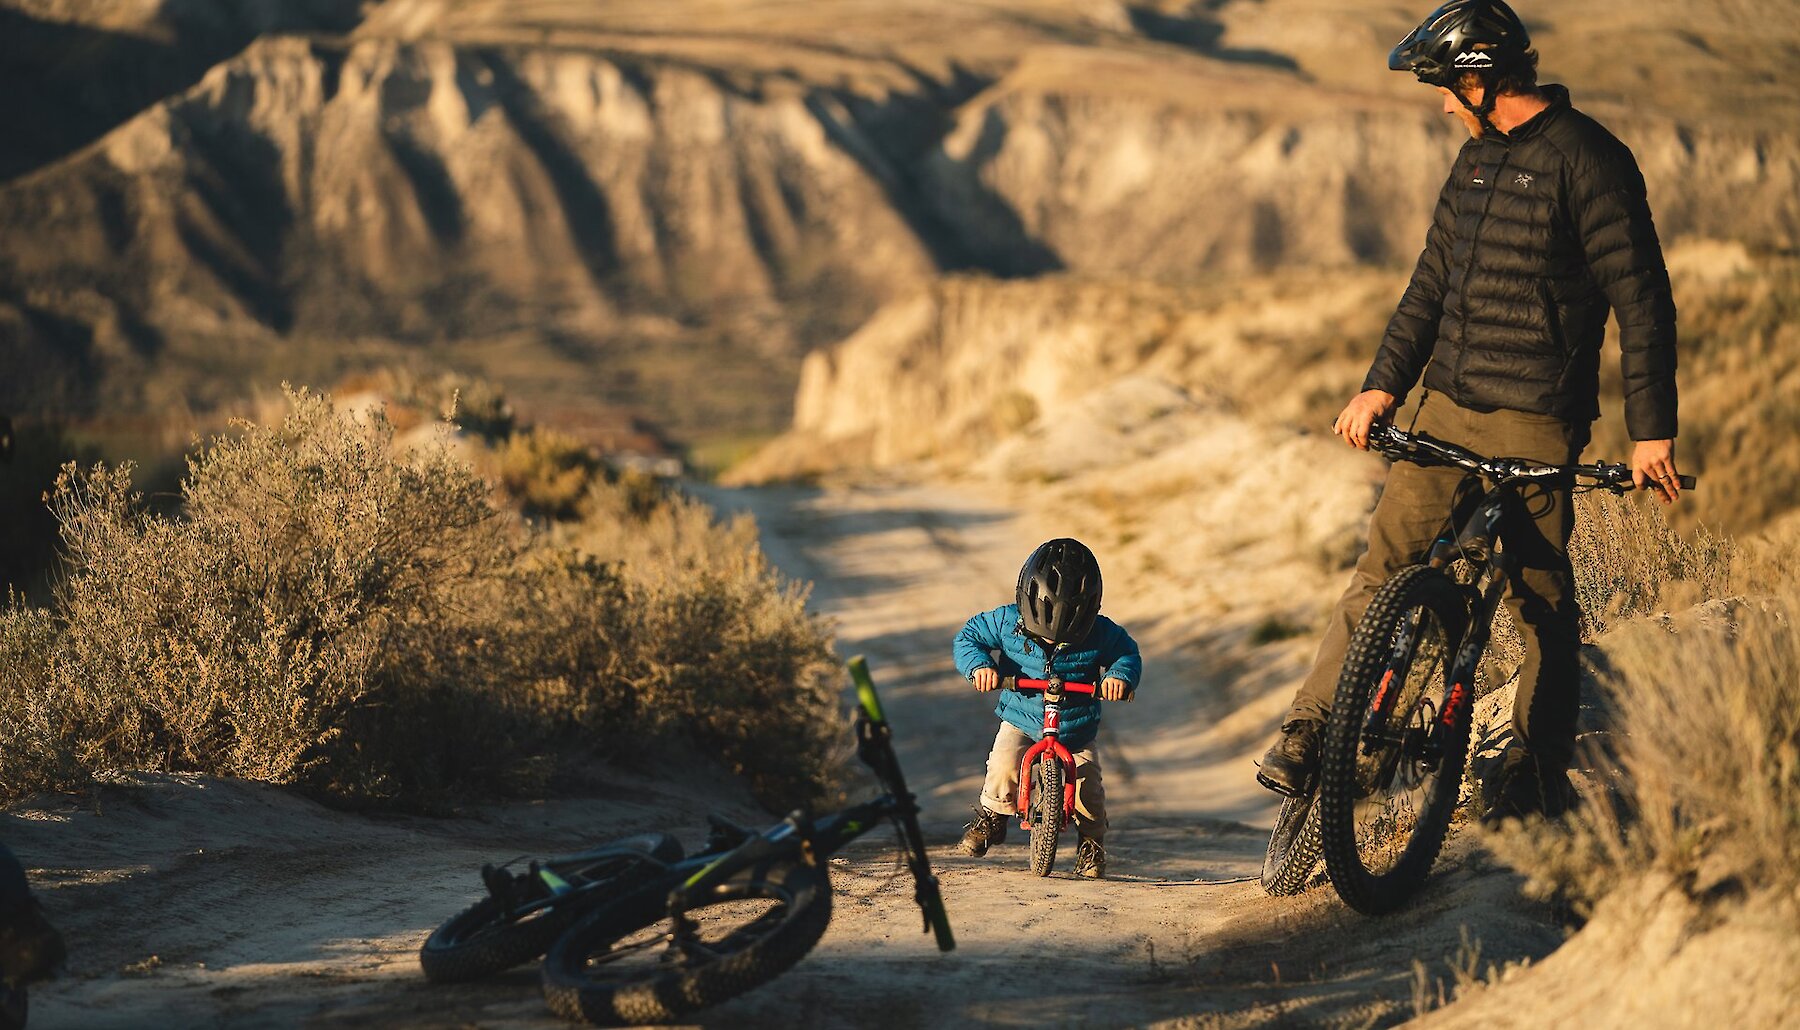 Matt Hunter mountain biking with his son on a Kamloops trail with the iconic hoodoos in the background.